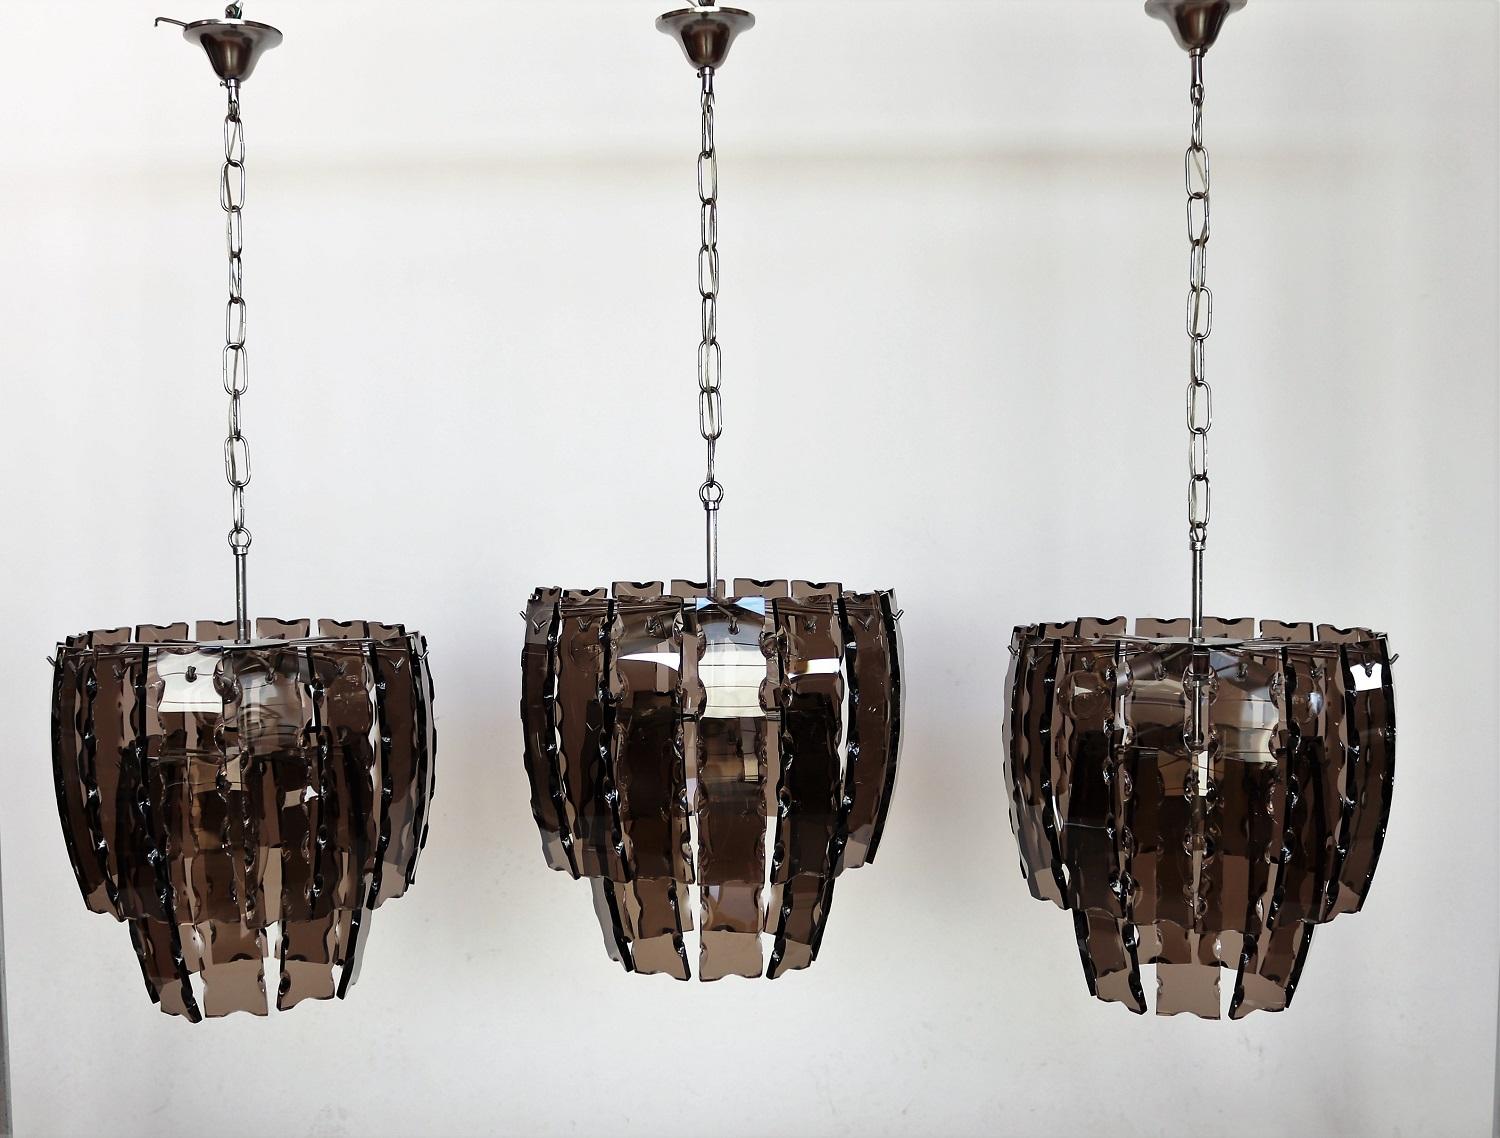 Wonderful smoke / dark brown glass chandeliers from Murano with chromed lamp base.
Made in Italy in the 1970s.
Three same pieces available but sold separately.
The lamps are in wonderful vintage and working condition and can be used